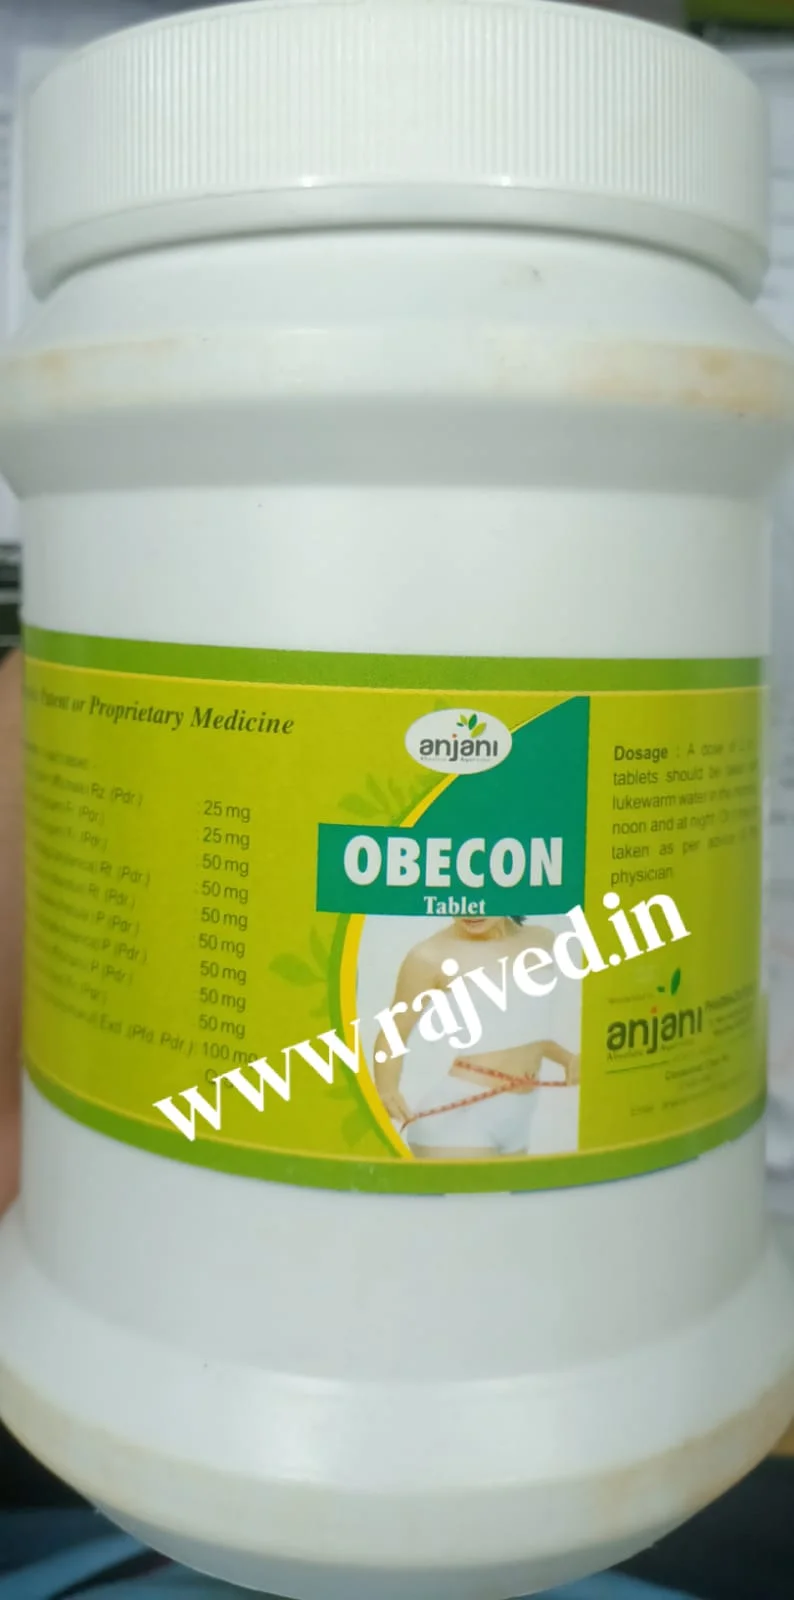 obecon tablet 500 tab upto 20% off free shipping Anjani Pharmaceuticals